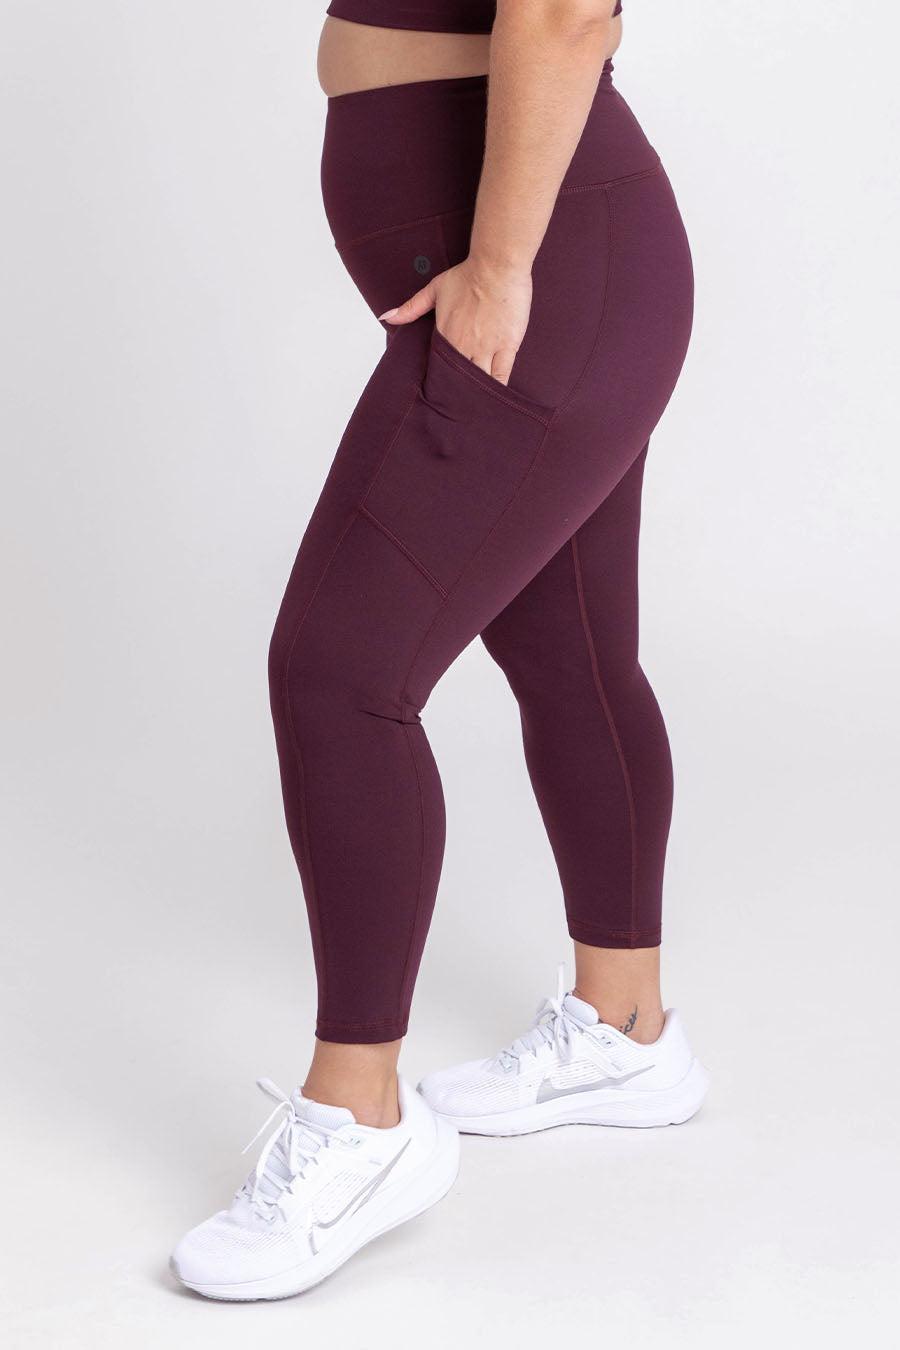 Smart Pocket 7/8 Length Tight, Wine, Active Truth